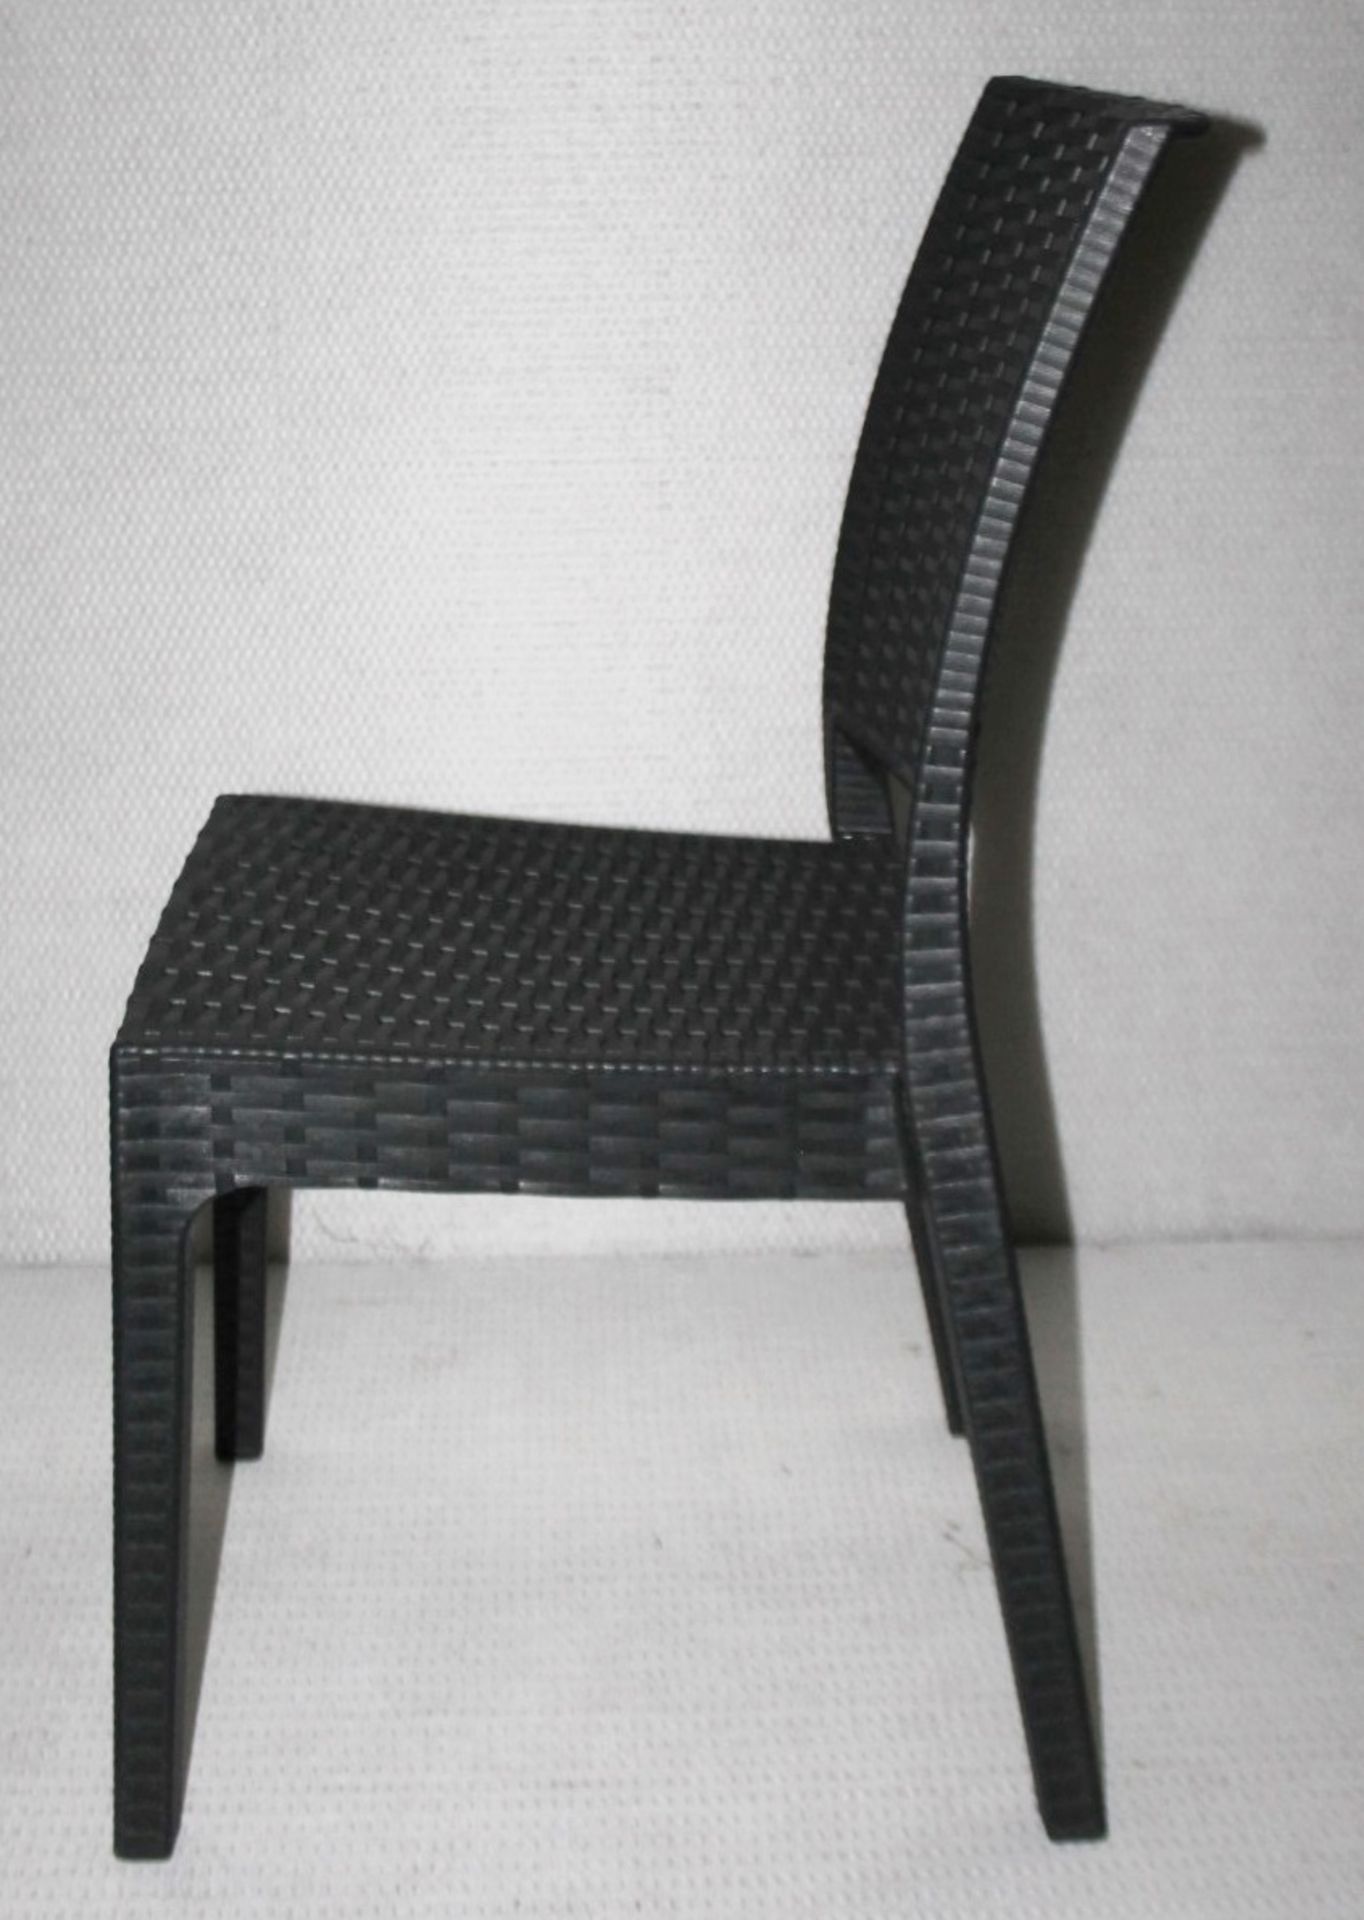 8 x Siesta 'Florida' Rattan Style Garden Chairs In Dark Grey - Suitable For Commercial or Home Use - - Image 11 of 14